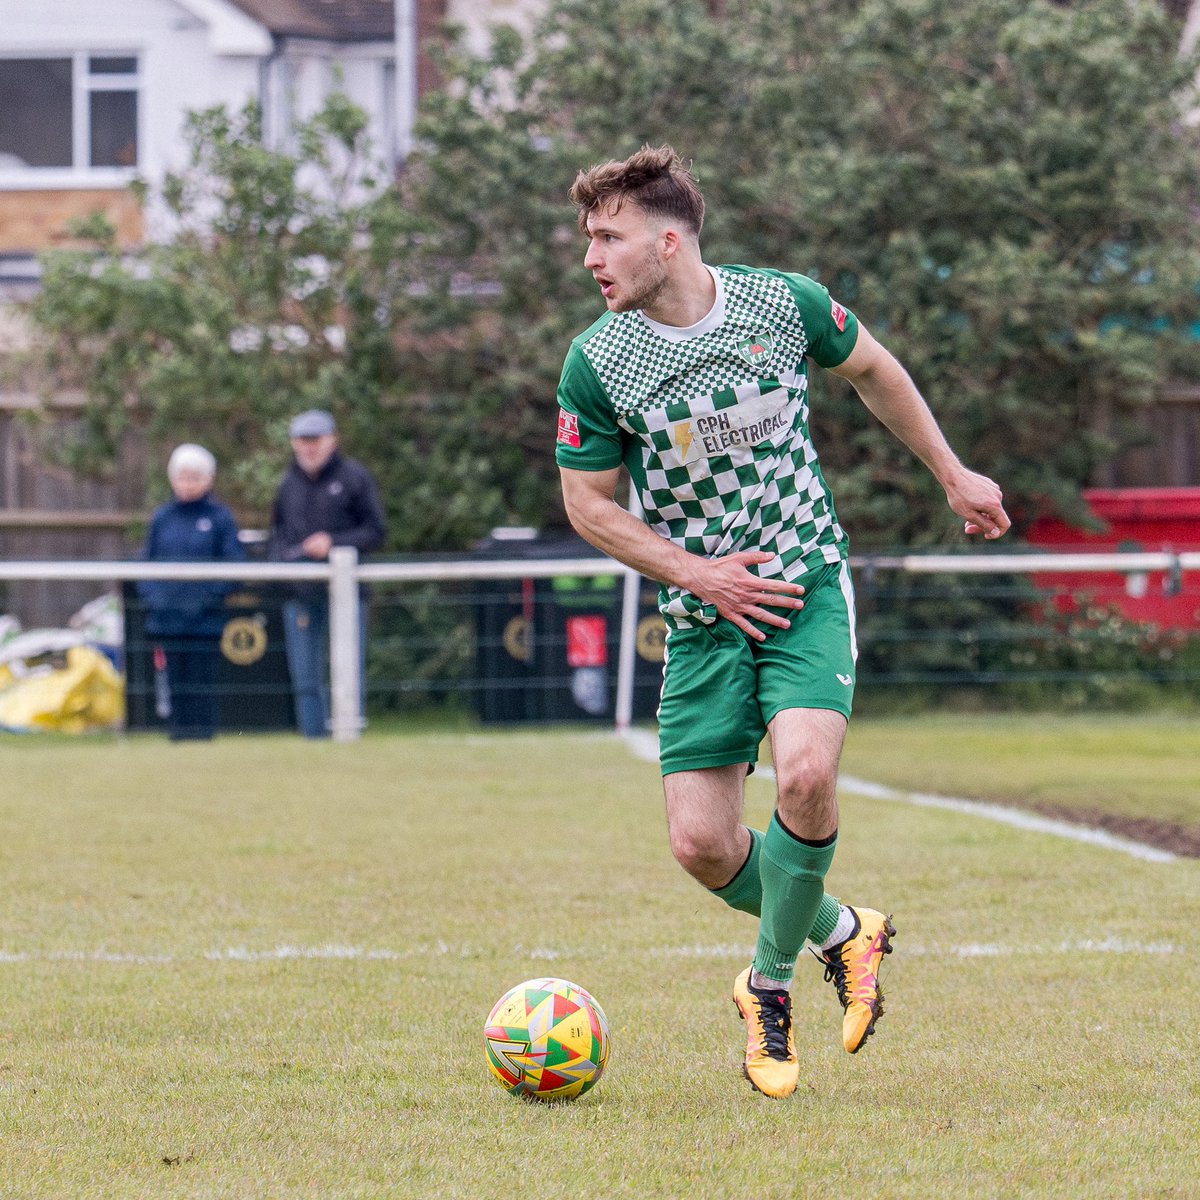 📸 The full Match Gallery is now available to view following Saturday’s victory! 👉 flic.kr/s/aHBqjBobuy The superb work of @duncan_eames shines through once again 🤩 #COYG #KFC 💚